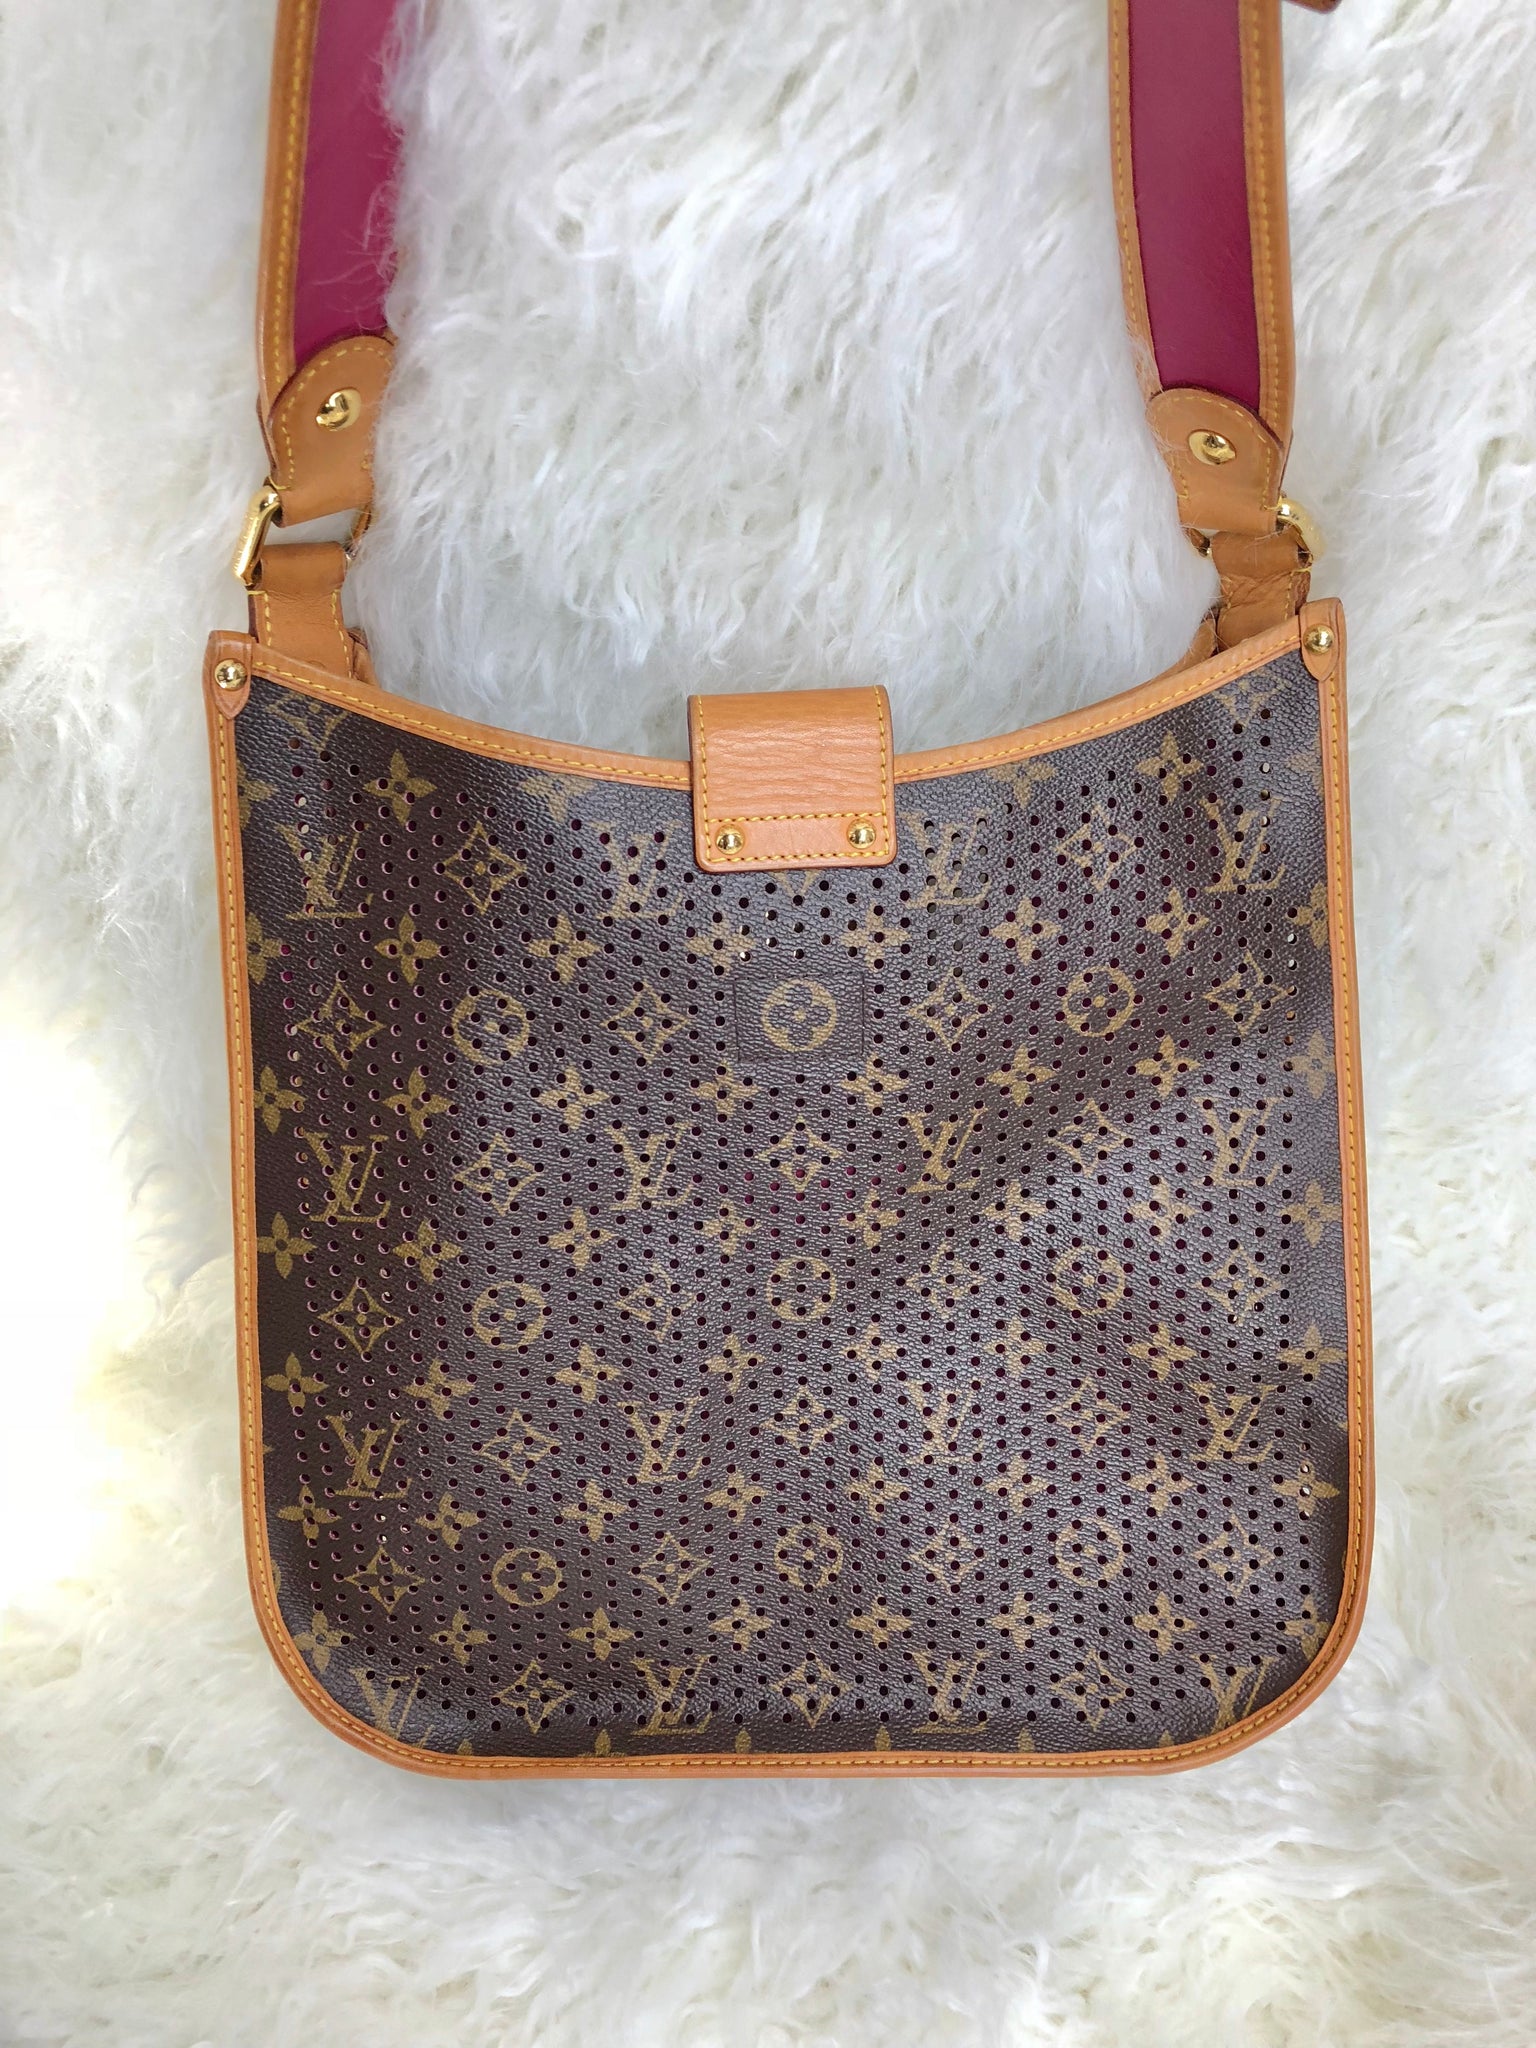 LOUIS VUITTON Limited Edition Perforated Musette Bag (Monogram & Fuchs – Pretty Things Hoarder